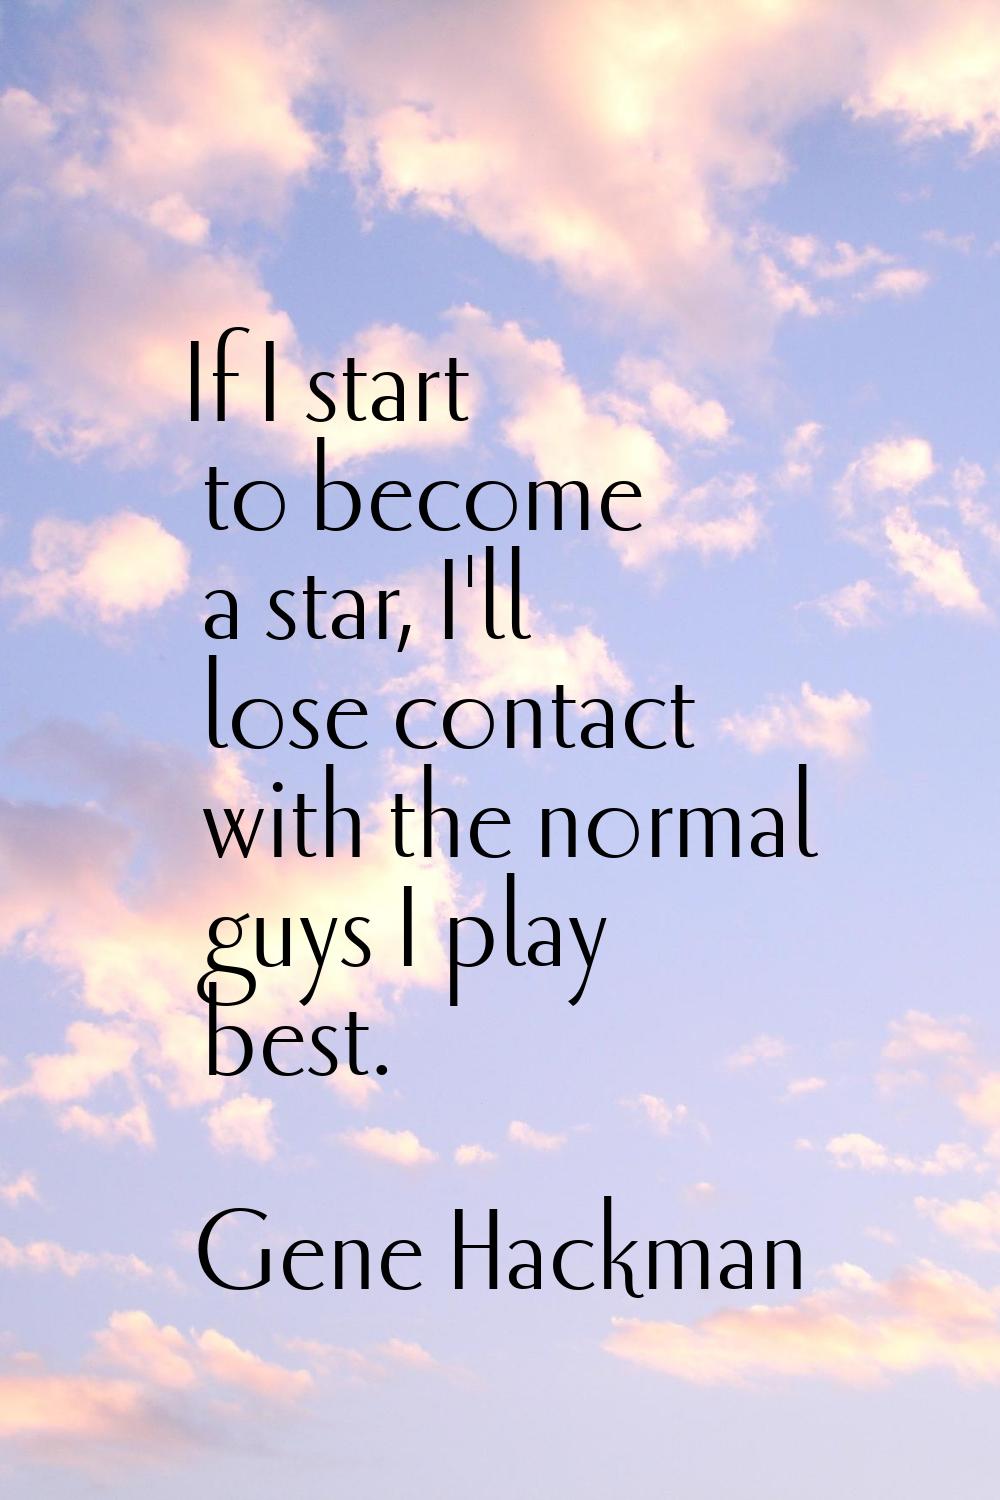 If I start to become a star, I'll lose contact with the normal guys I play best.